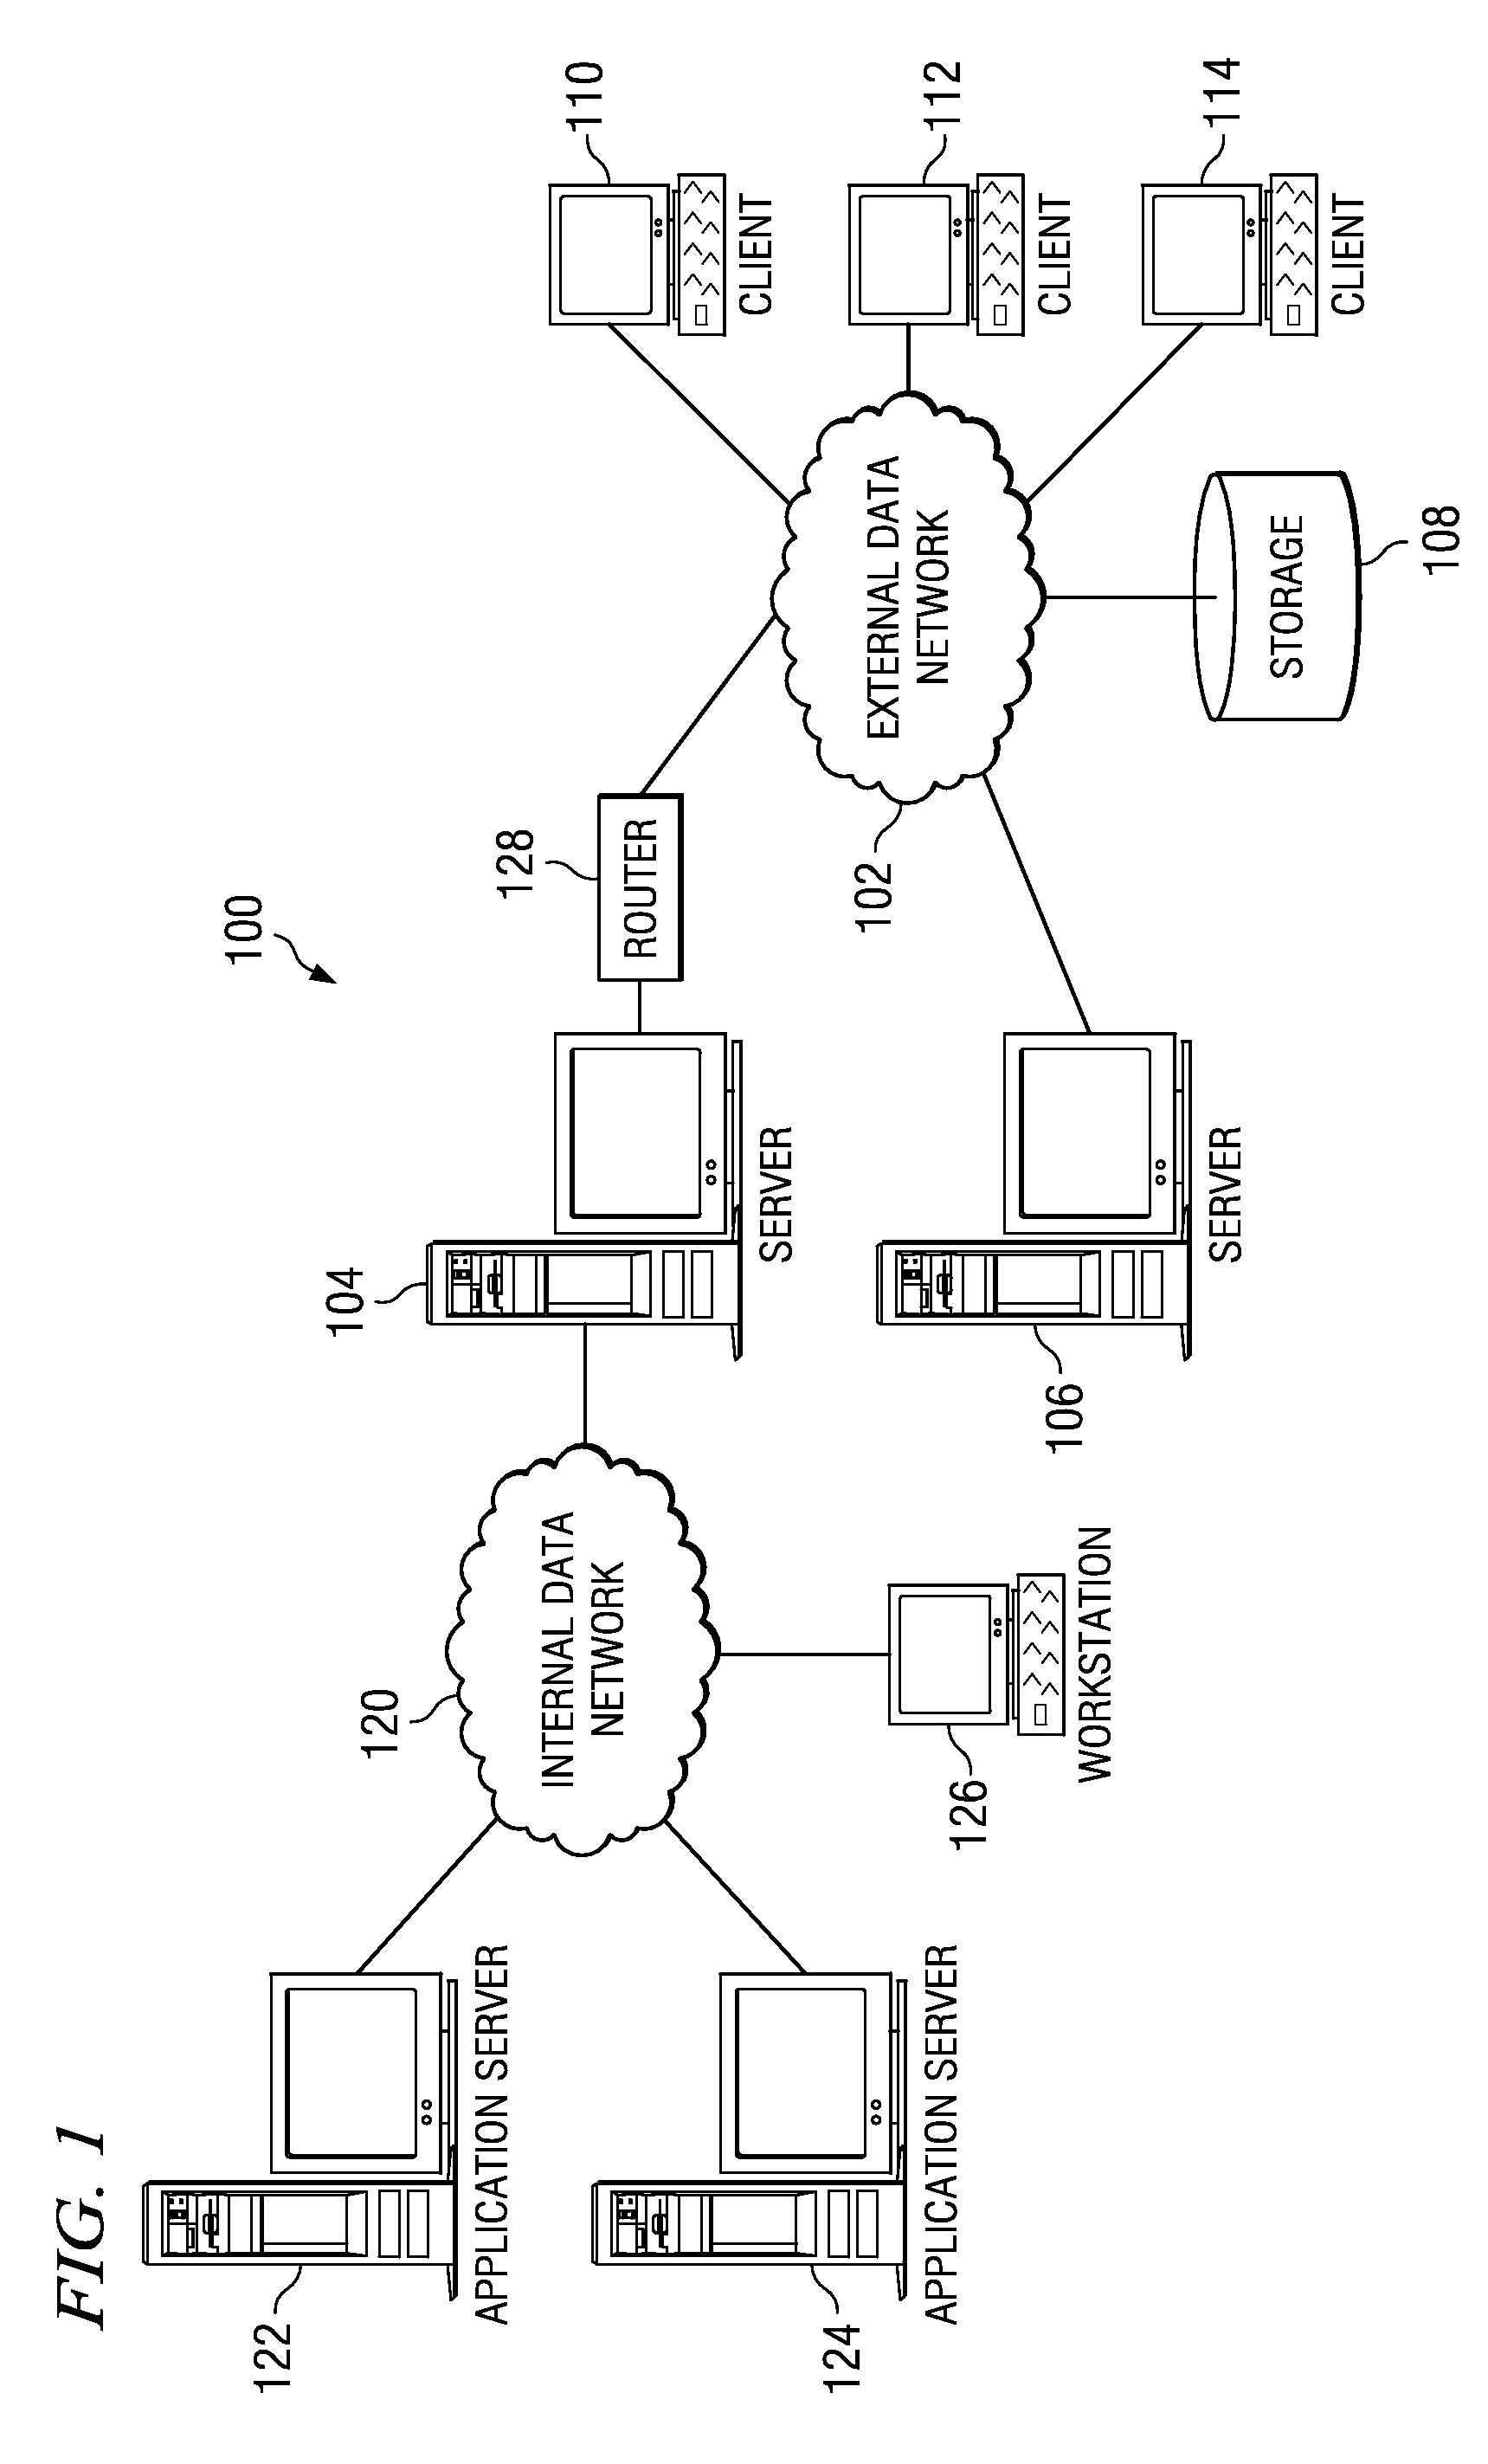 System and Method for Creating Global Sessions Across Converged Protocol Applications